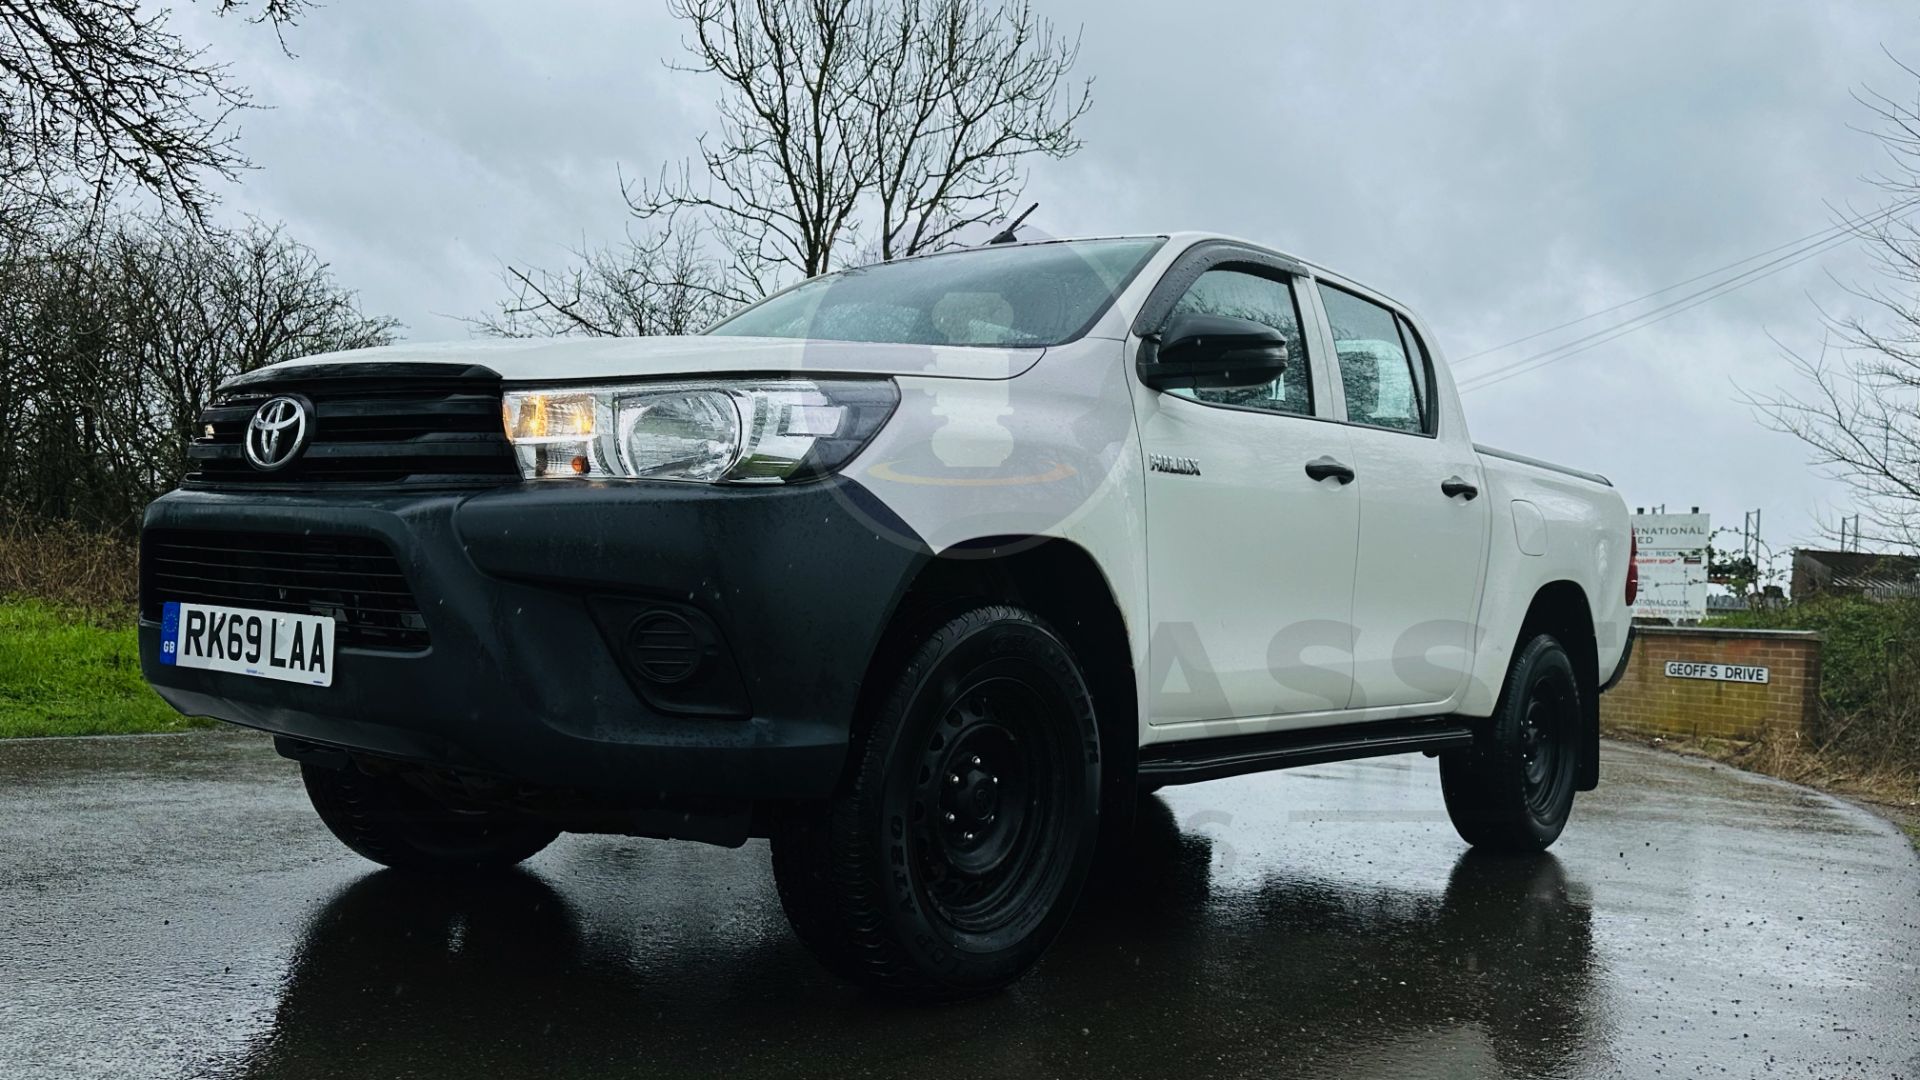 TOYOTA HILUX *DOUBLE CAB PICK-UP* (2020 - EURO 6) 2.4 D-4D - AUTO STOP/START *AIR CON* (1 OWNER) - Image 3 of 48